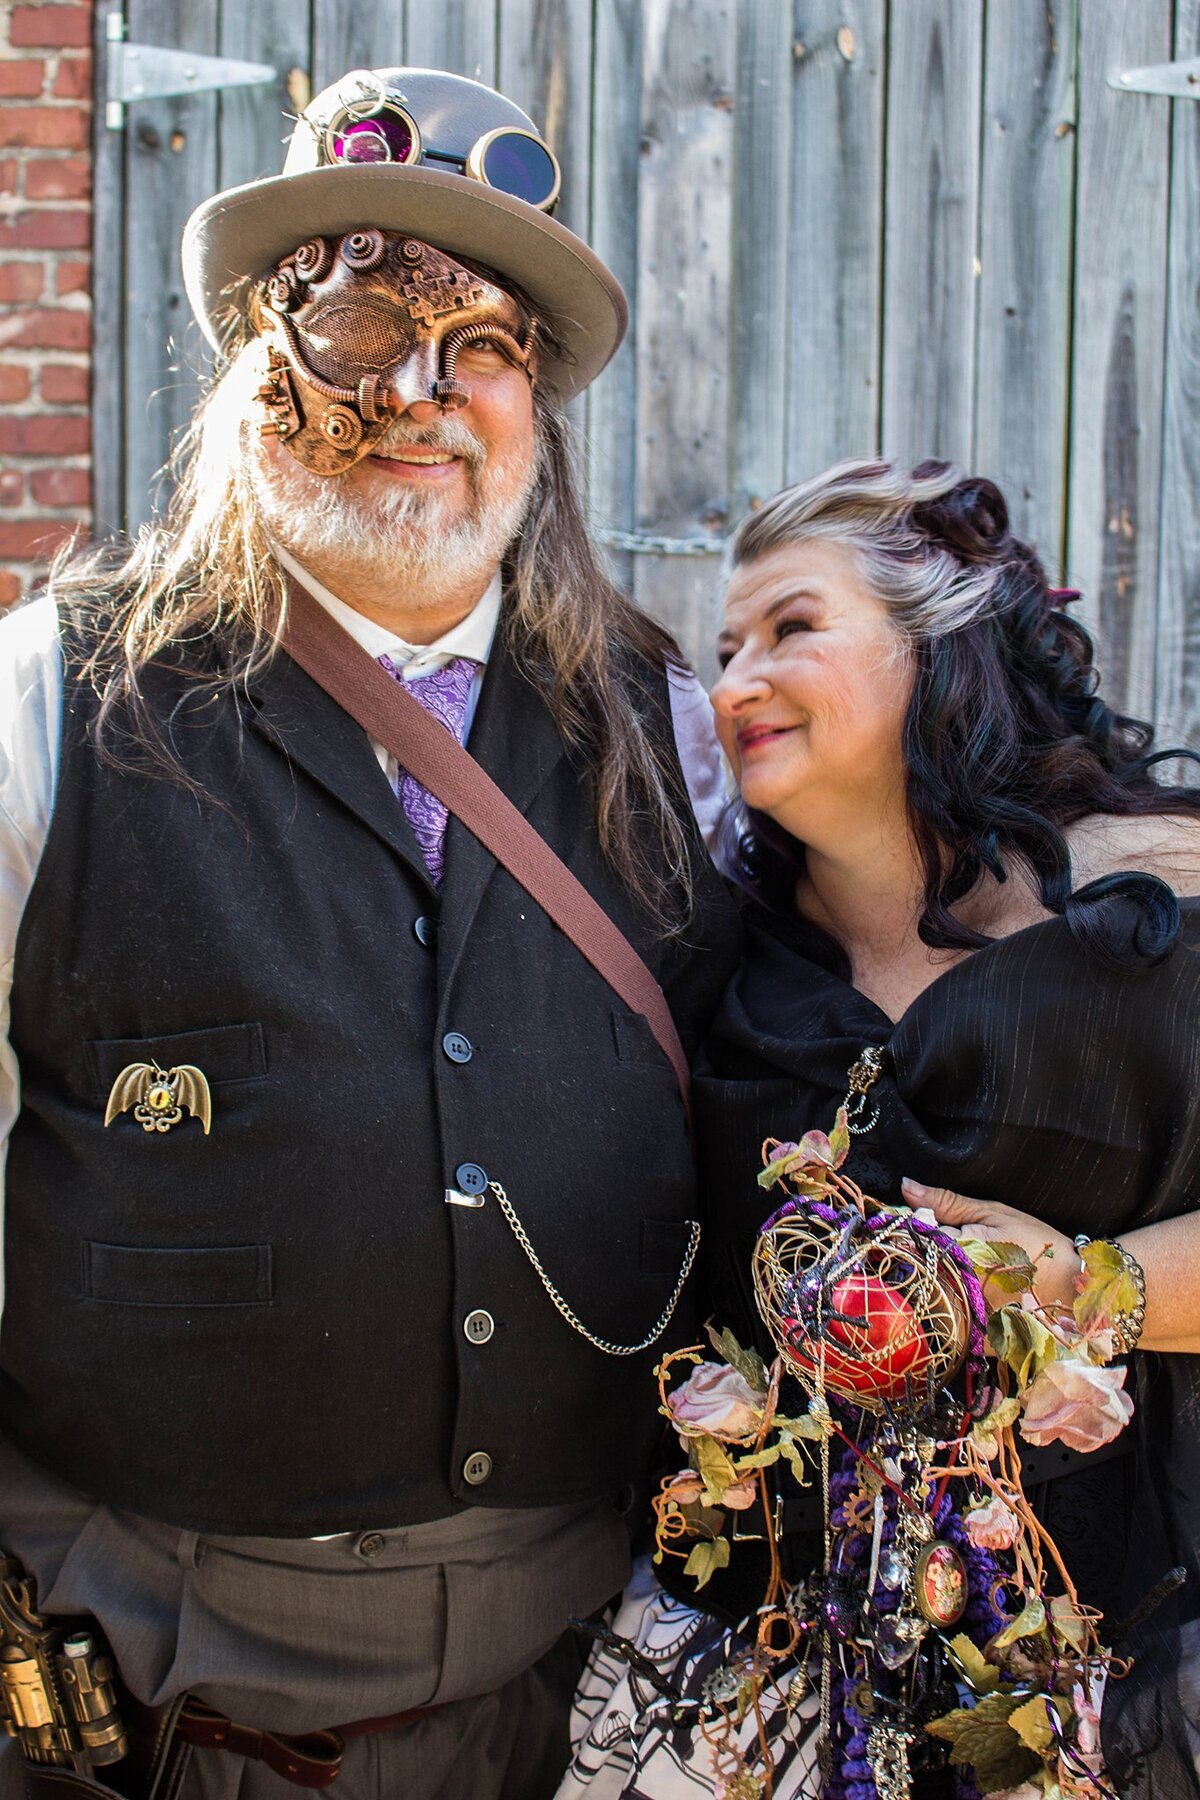 The steampunk groom wearing grey pants, a black vest with a white shirt and purple tie has a very detailed clockwork half mask and fedora hat with tinted steampunk goggles. The bride, wearing a black and white wedding dress to match her black and white hair holds a bouquet of broken watch pieces, brooches, skeleton keys and blush roses.